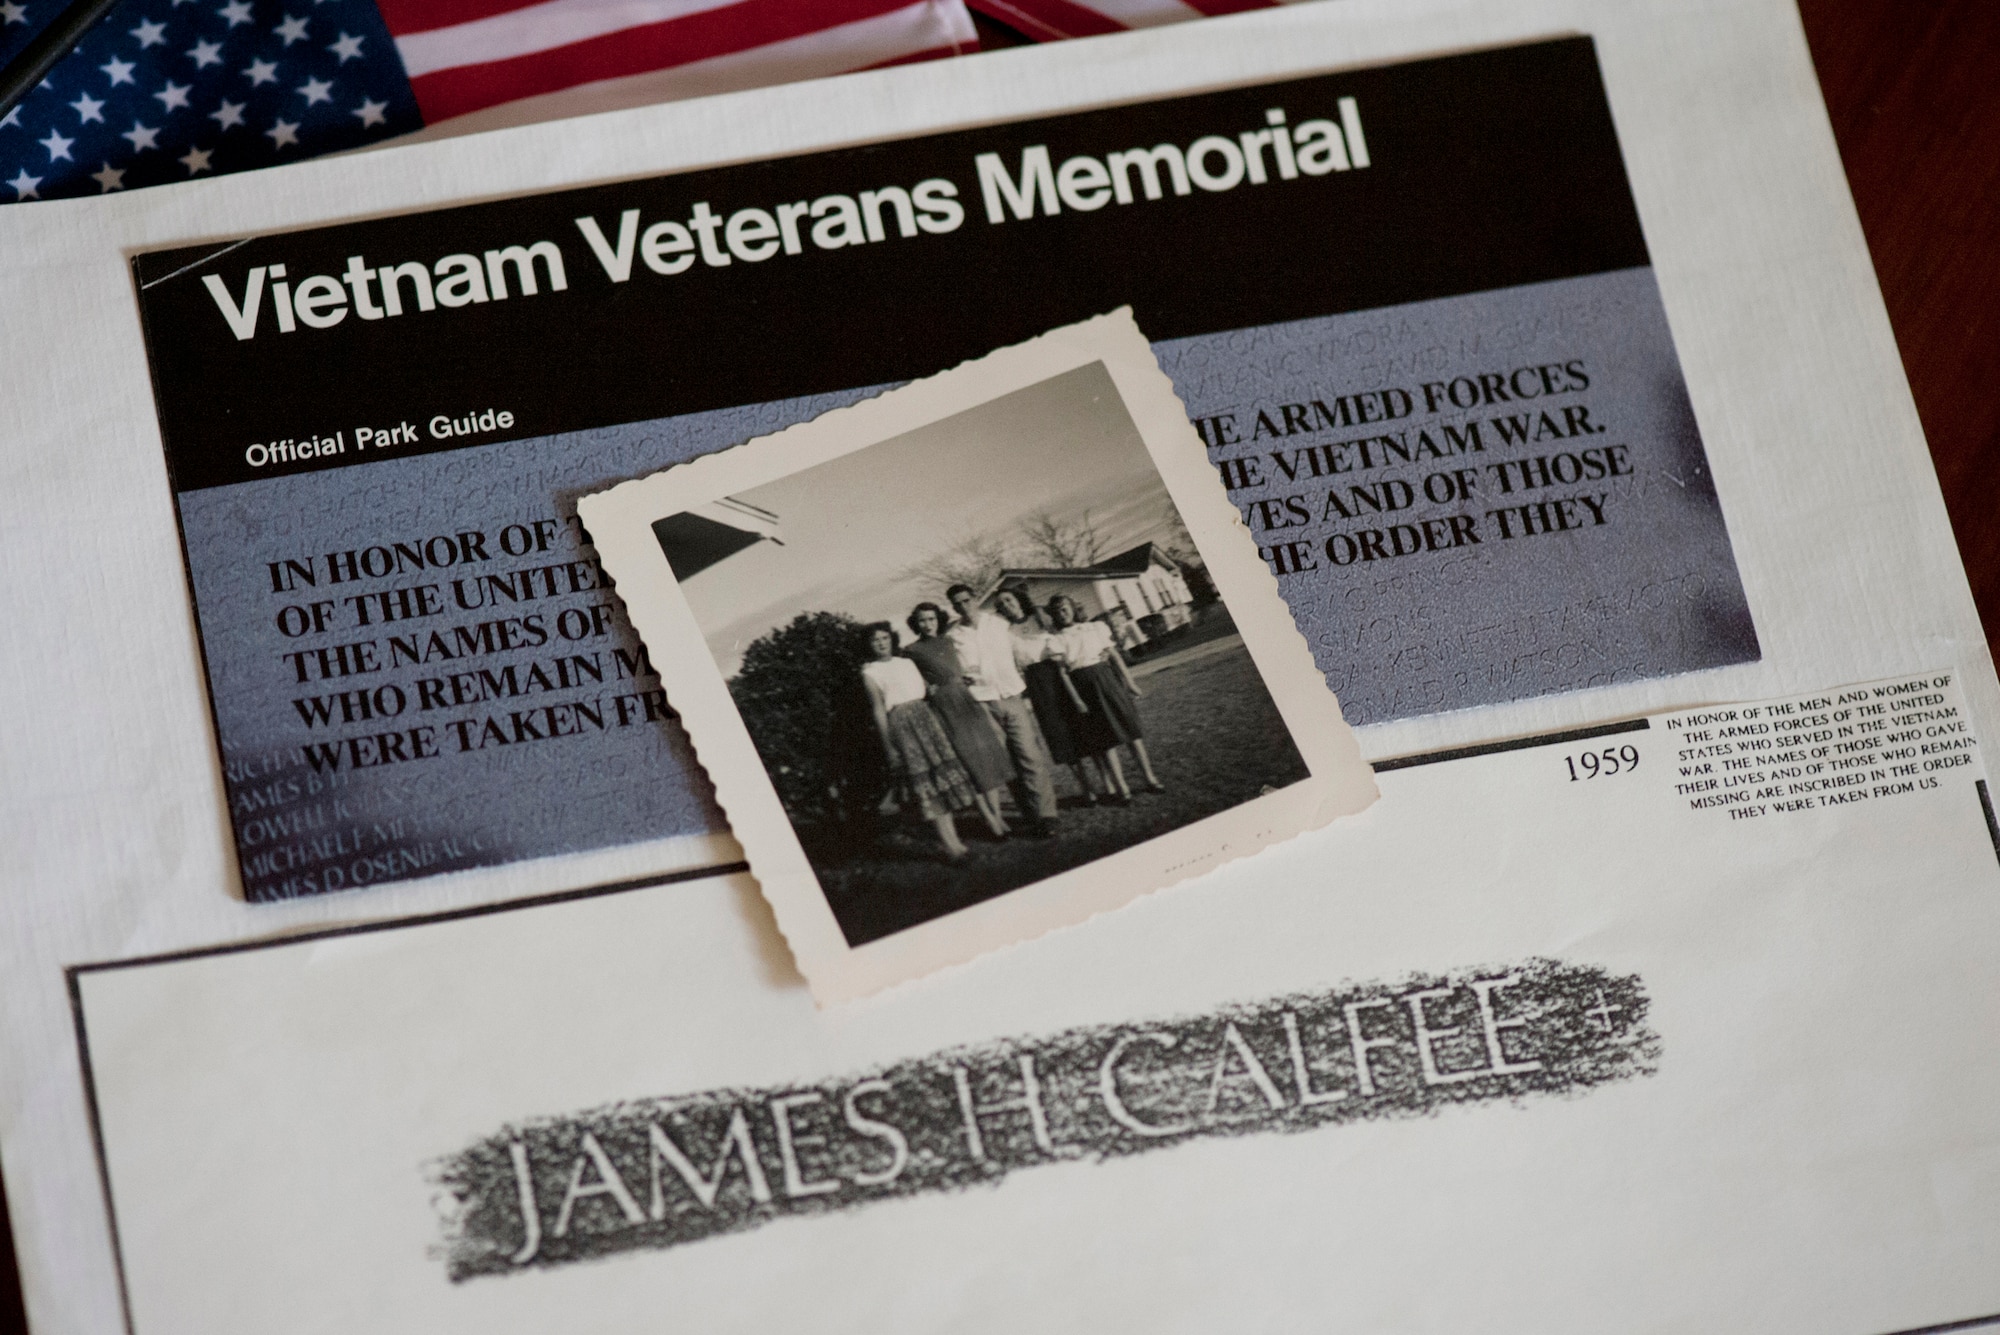 A photo of the late Master Sgt. James Calfee with his sisters sits on a Vietnam Veterans Memorial guide in Houston, Texas, Aug. 22, 2012. (U.S. Air Force photo/Val Gempis)